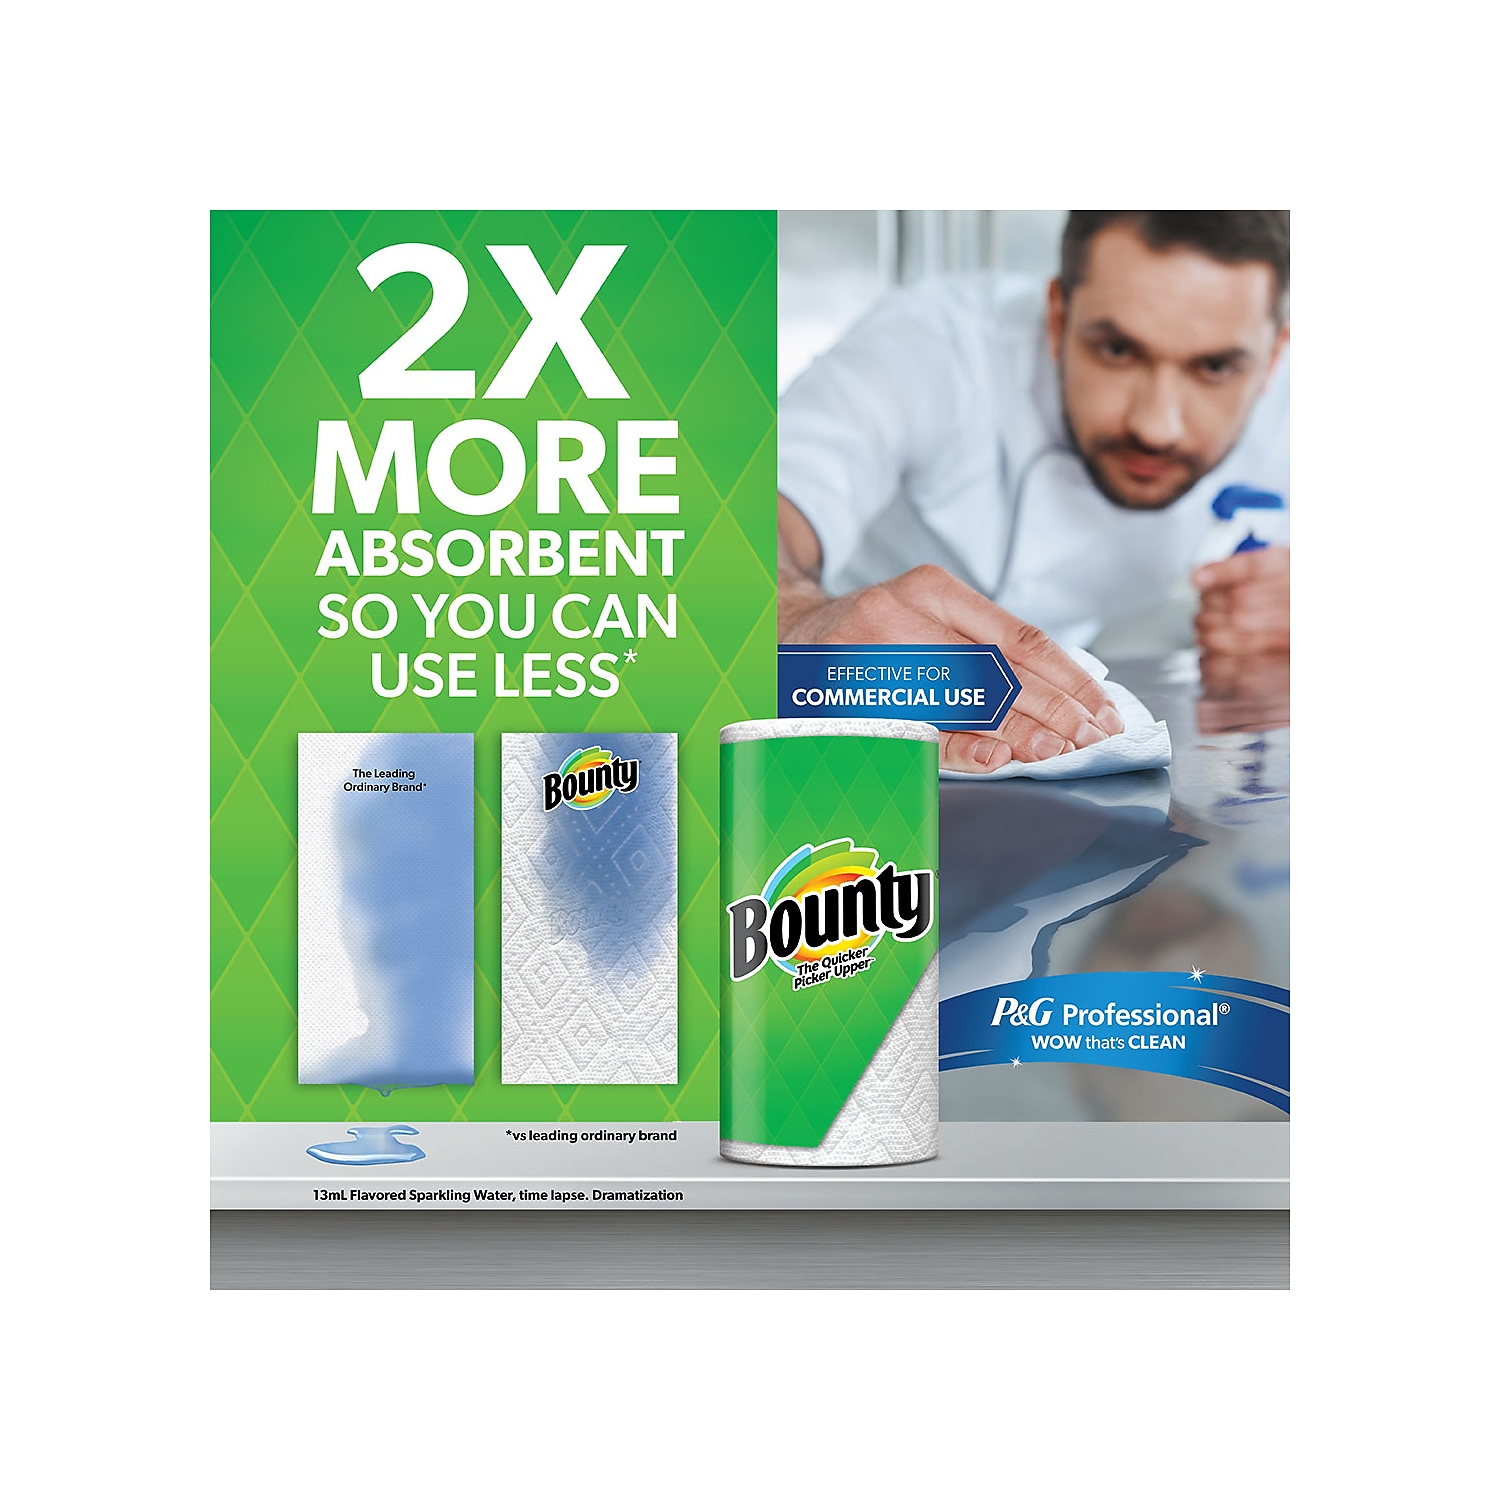 Bounty Select-A-Size Paper Towels, White, 6 Double Rolls - image 4 of 9